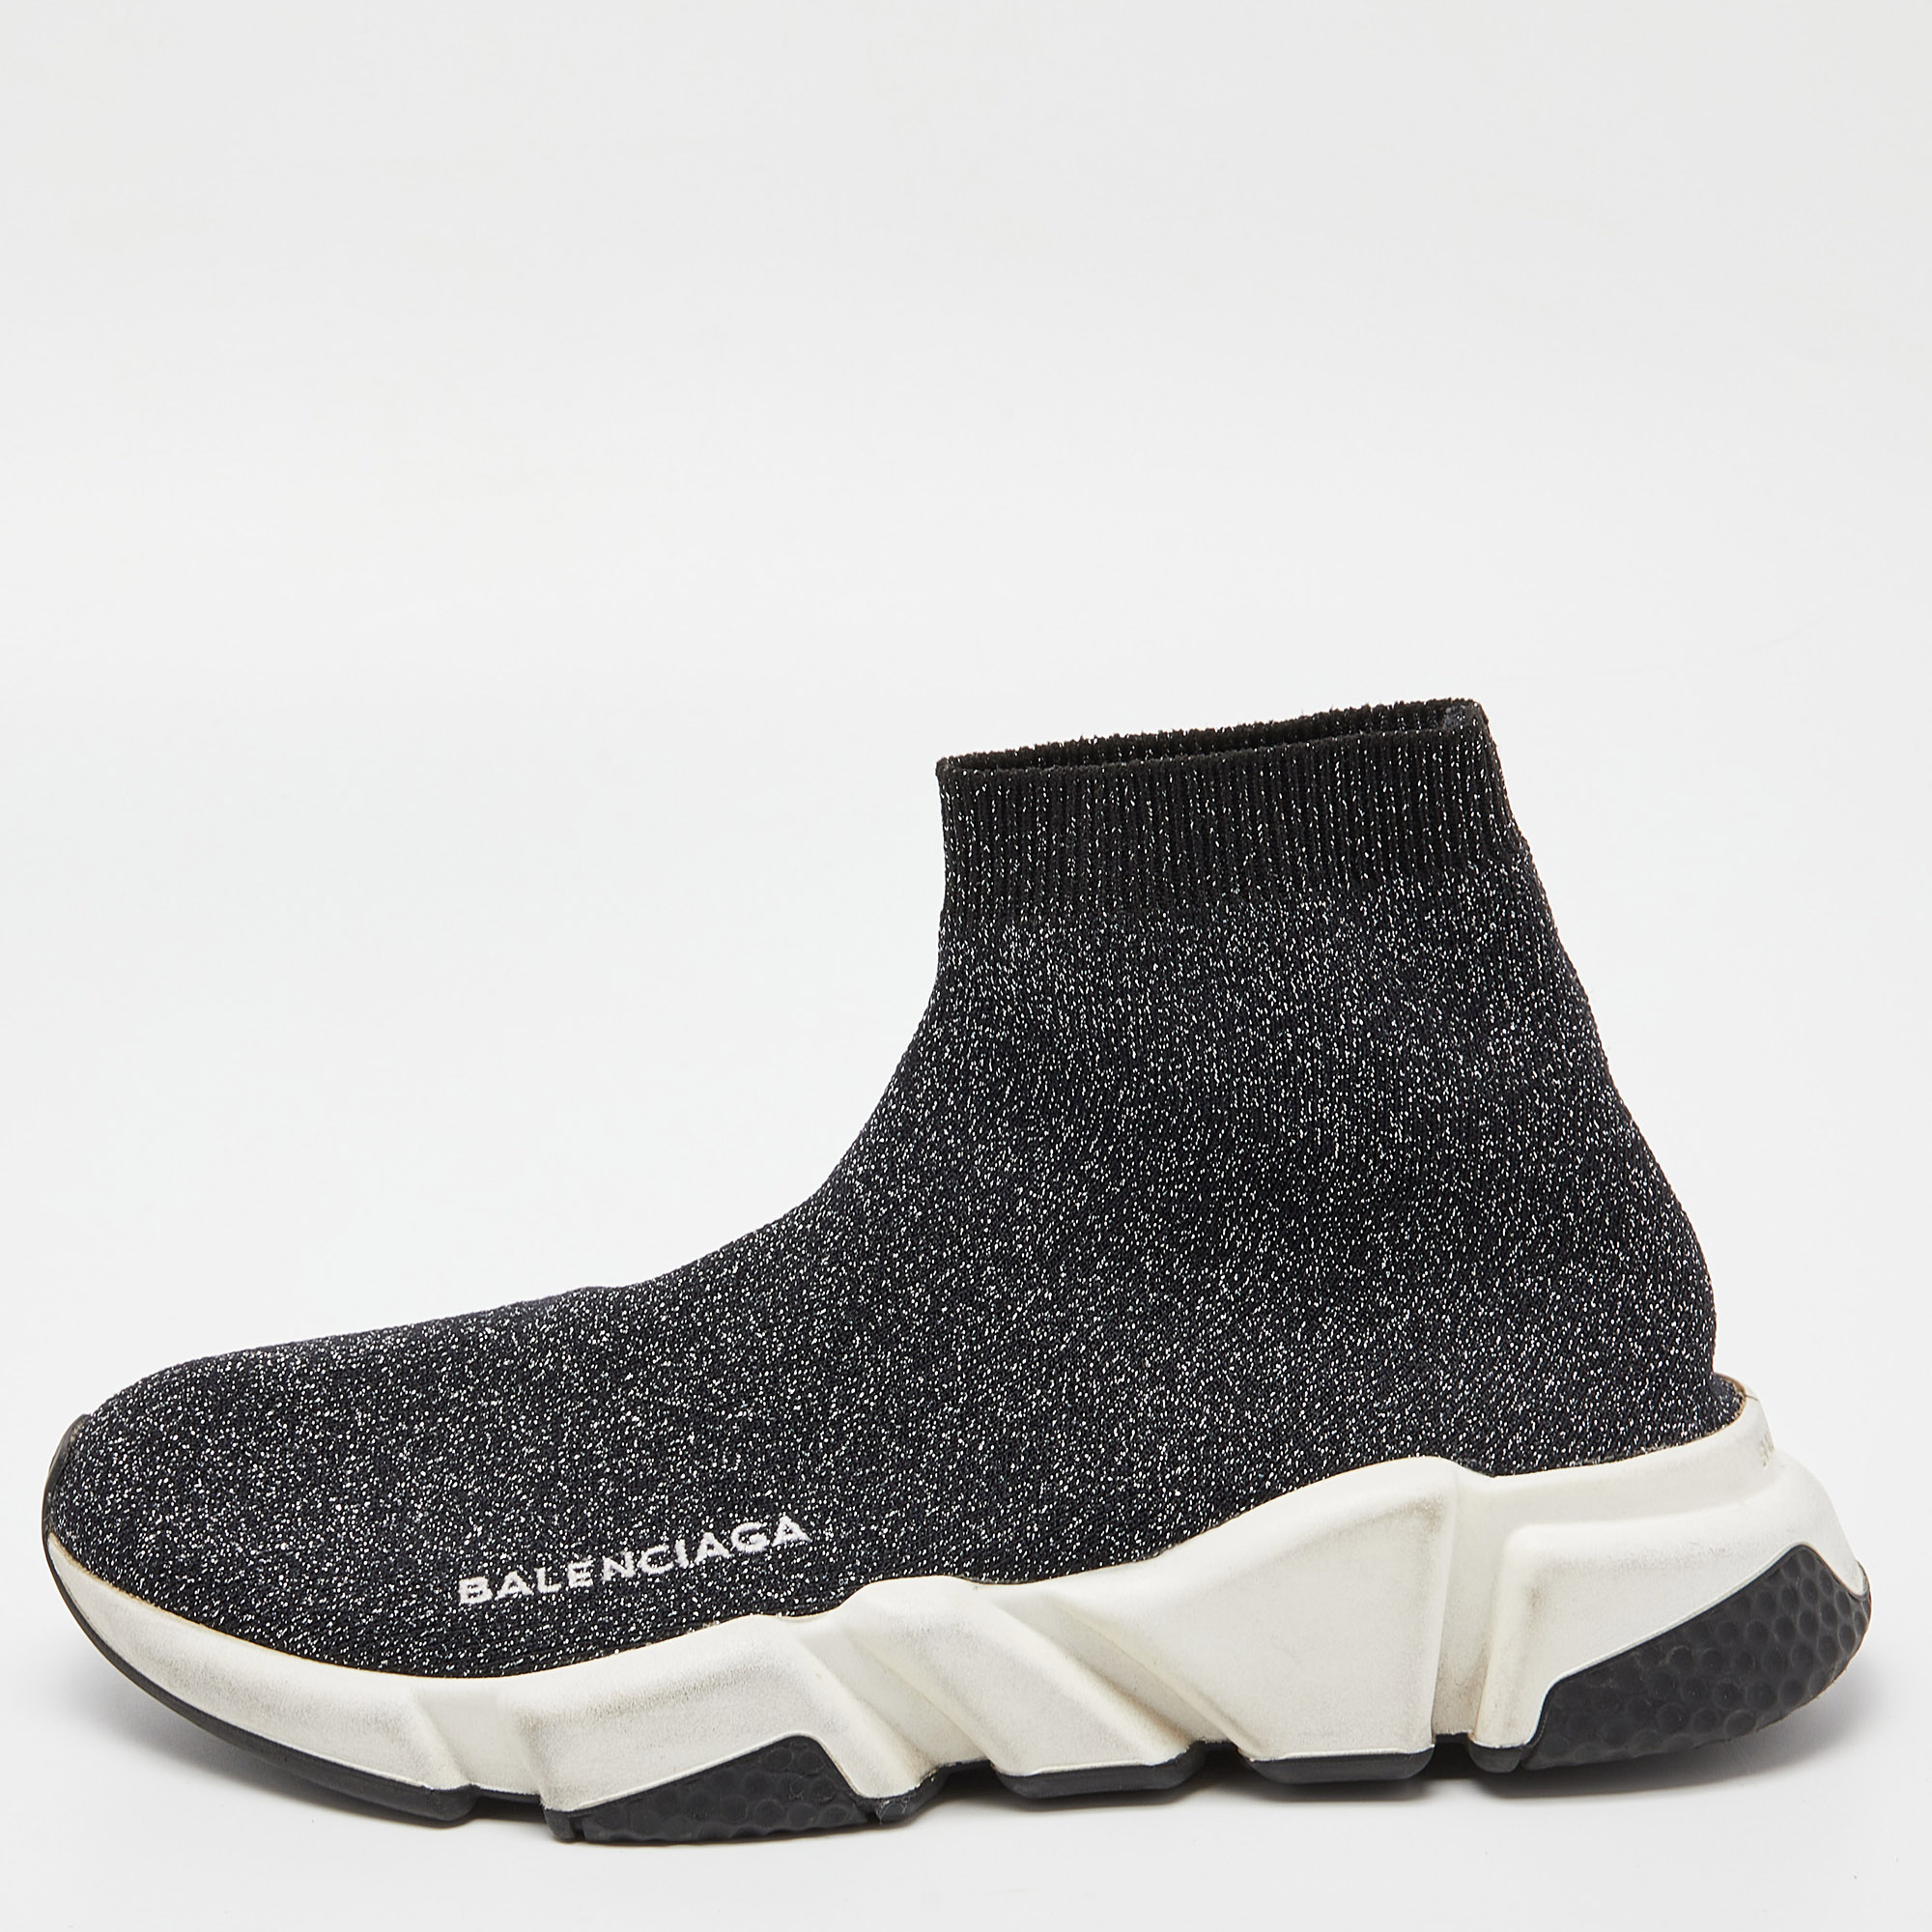 

Balenciaga Shimmery Black Knit Fabric Speed Trainer Sneakers Size